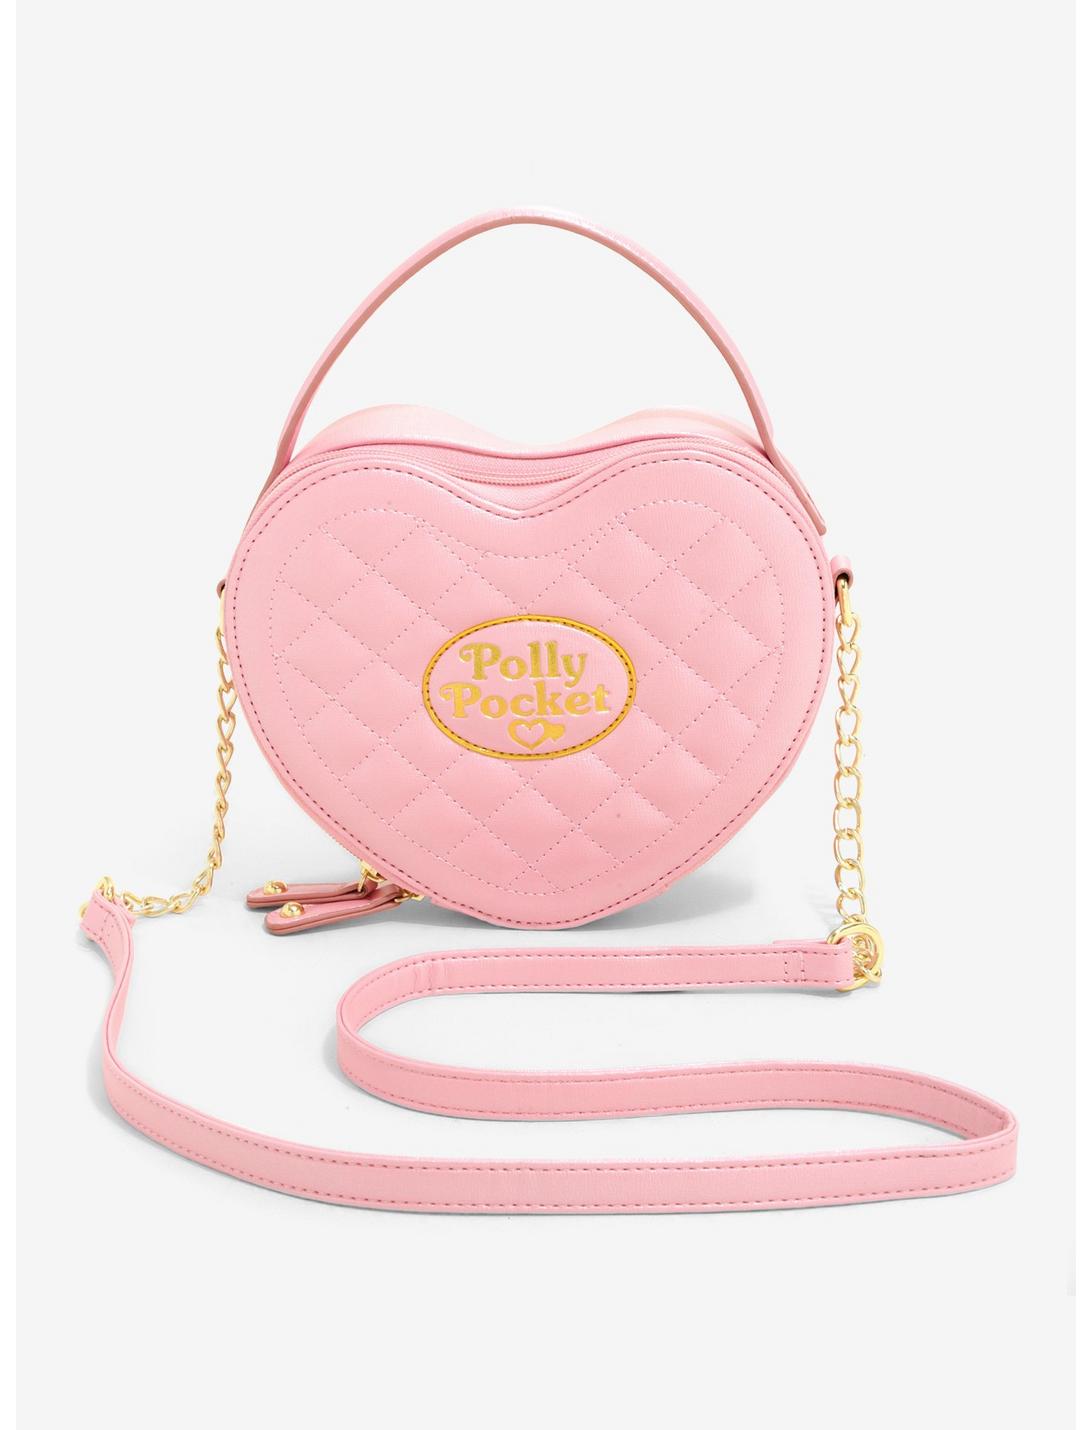 Polly Pocket Quilted Heart Crossbody Bag, , hi-res